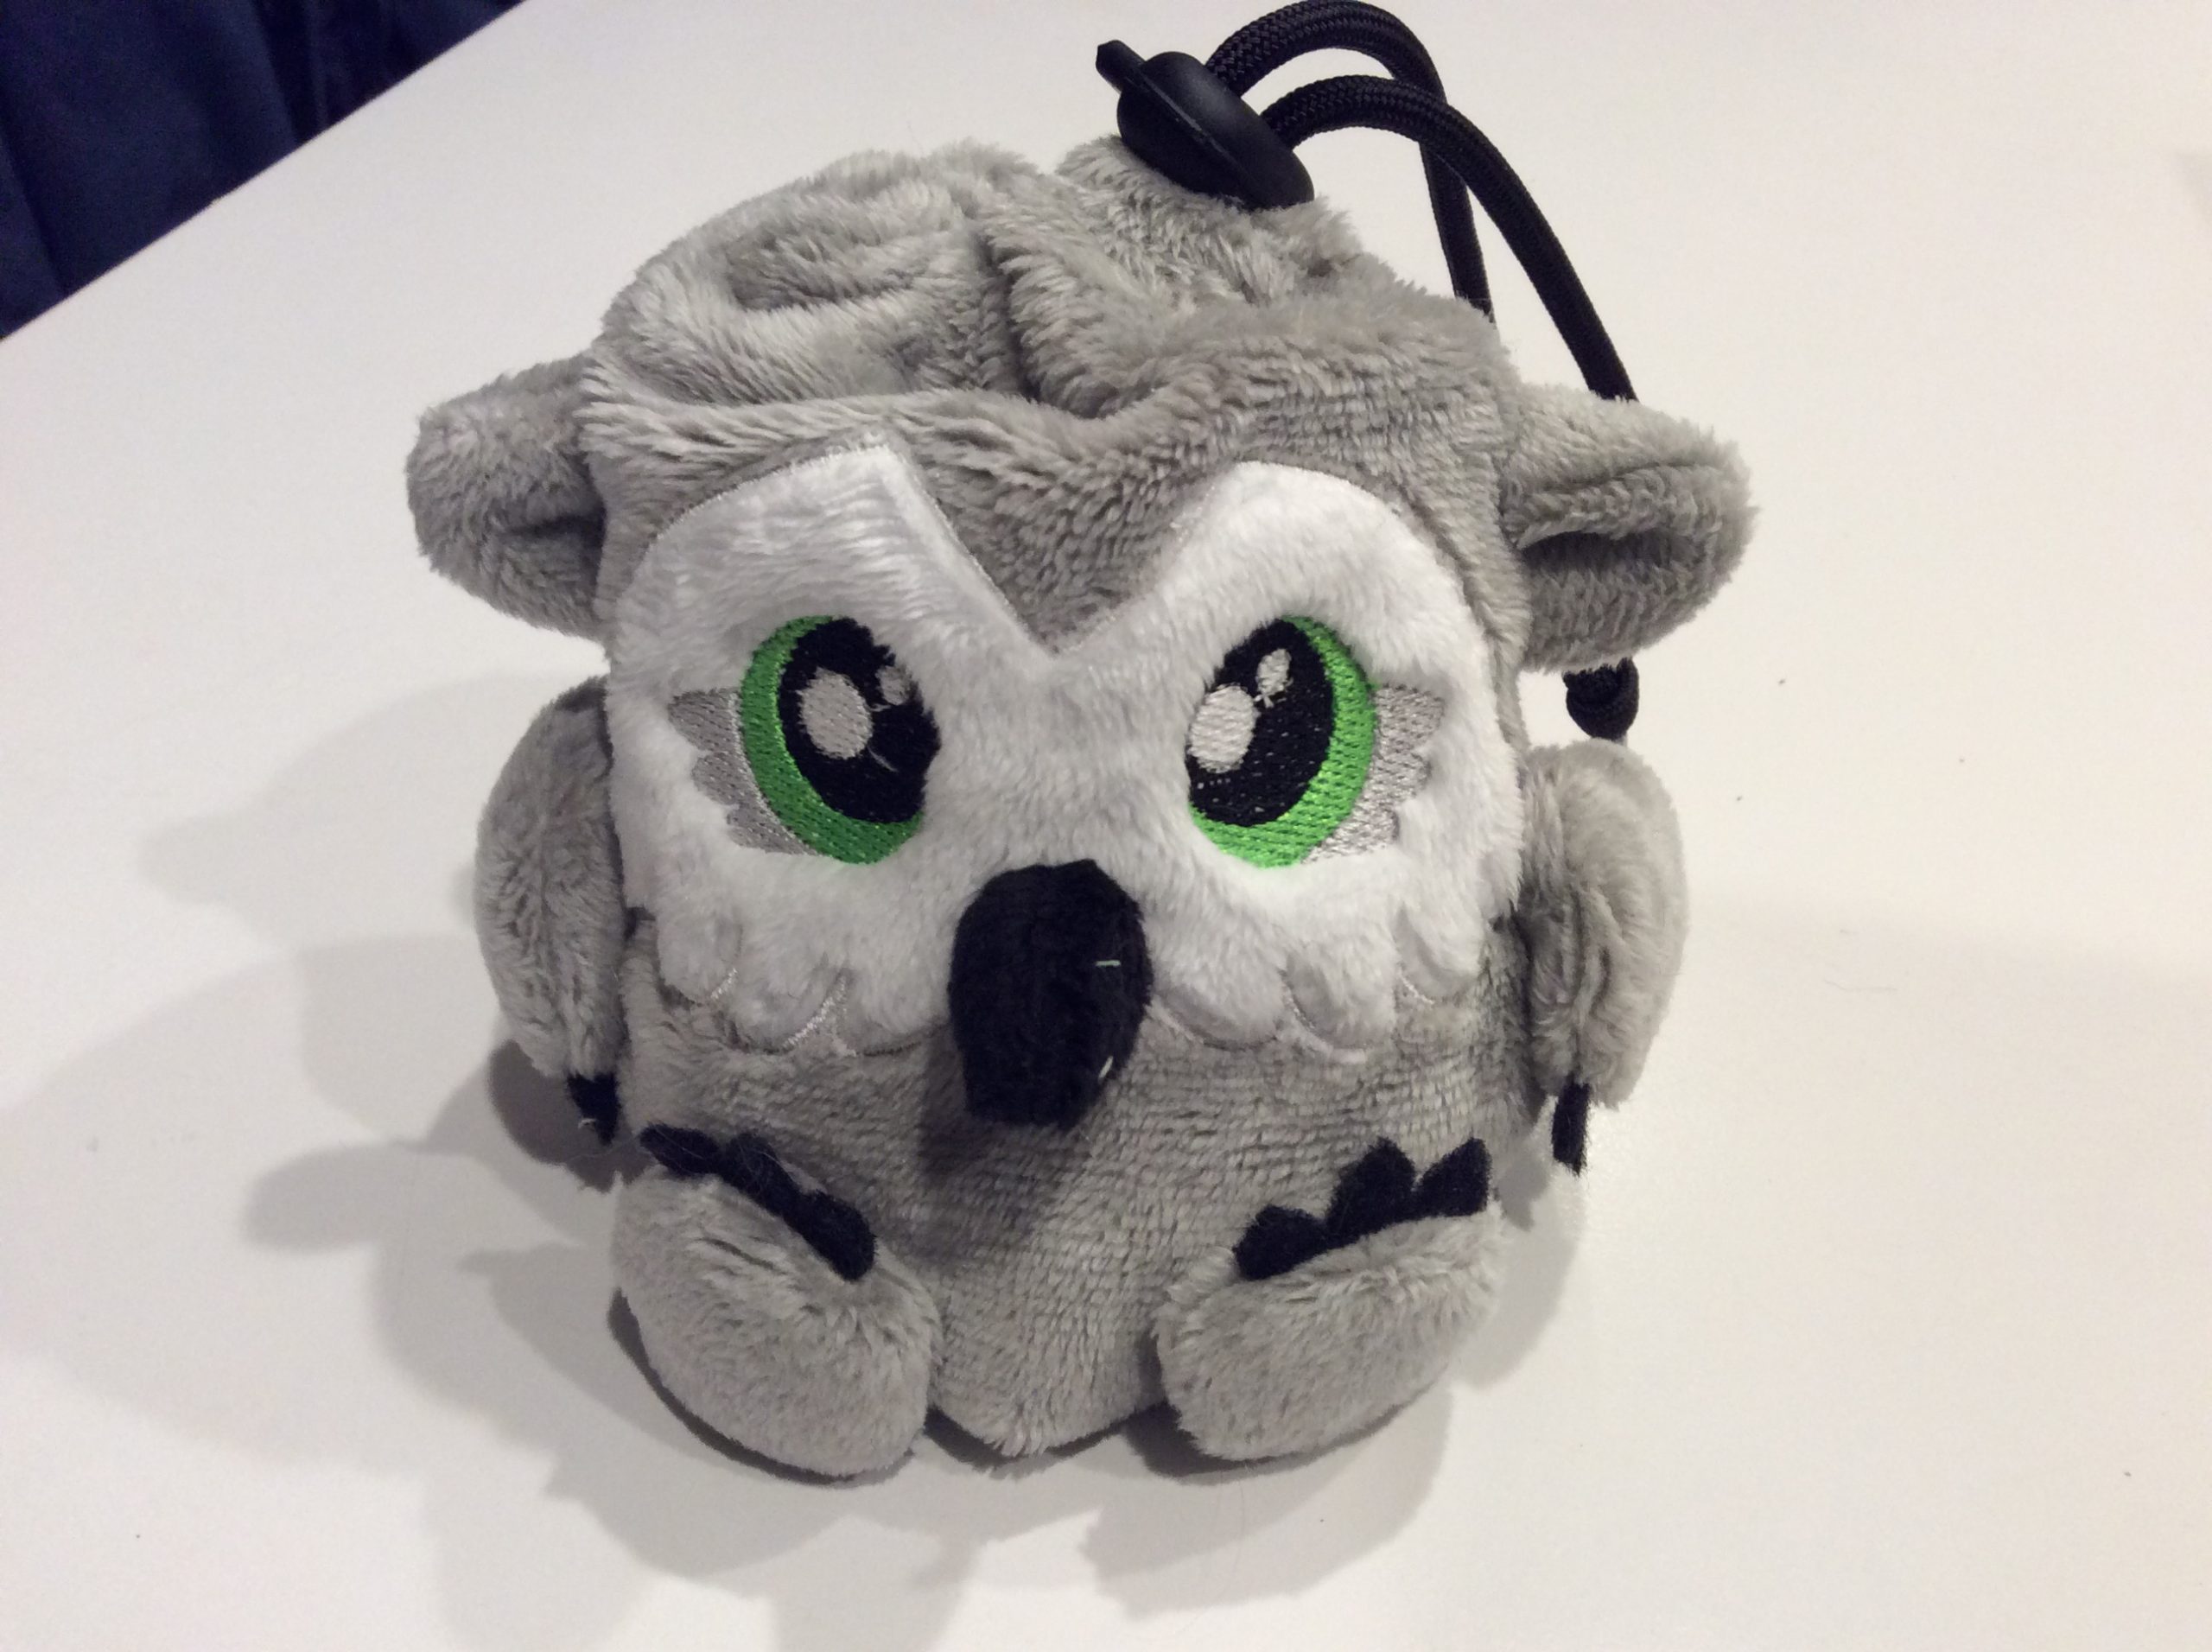 A tiny plush owlbear that is also a dice bag.